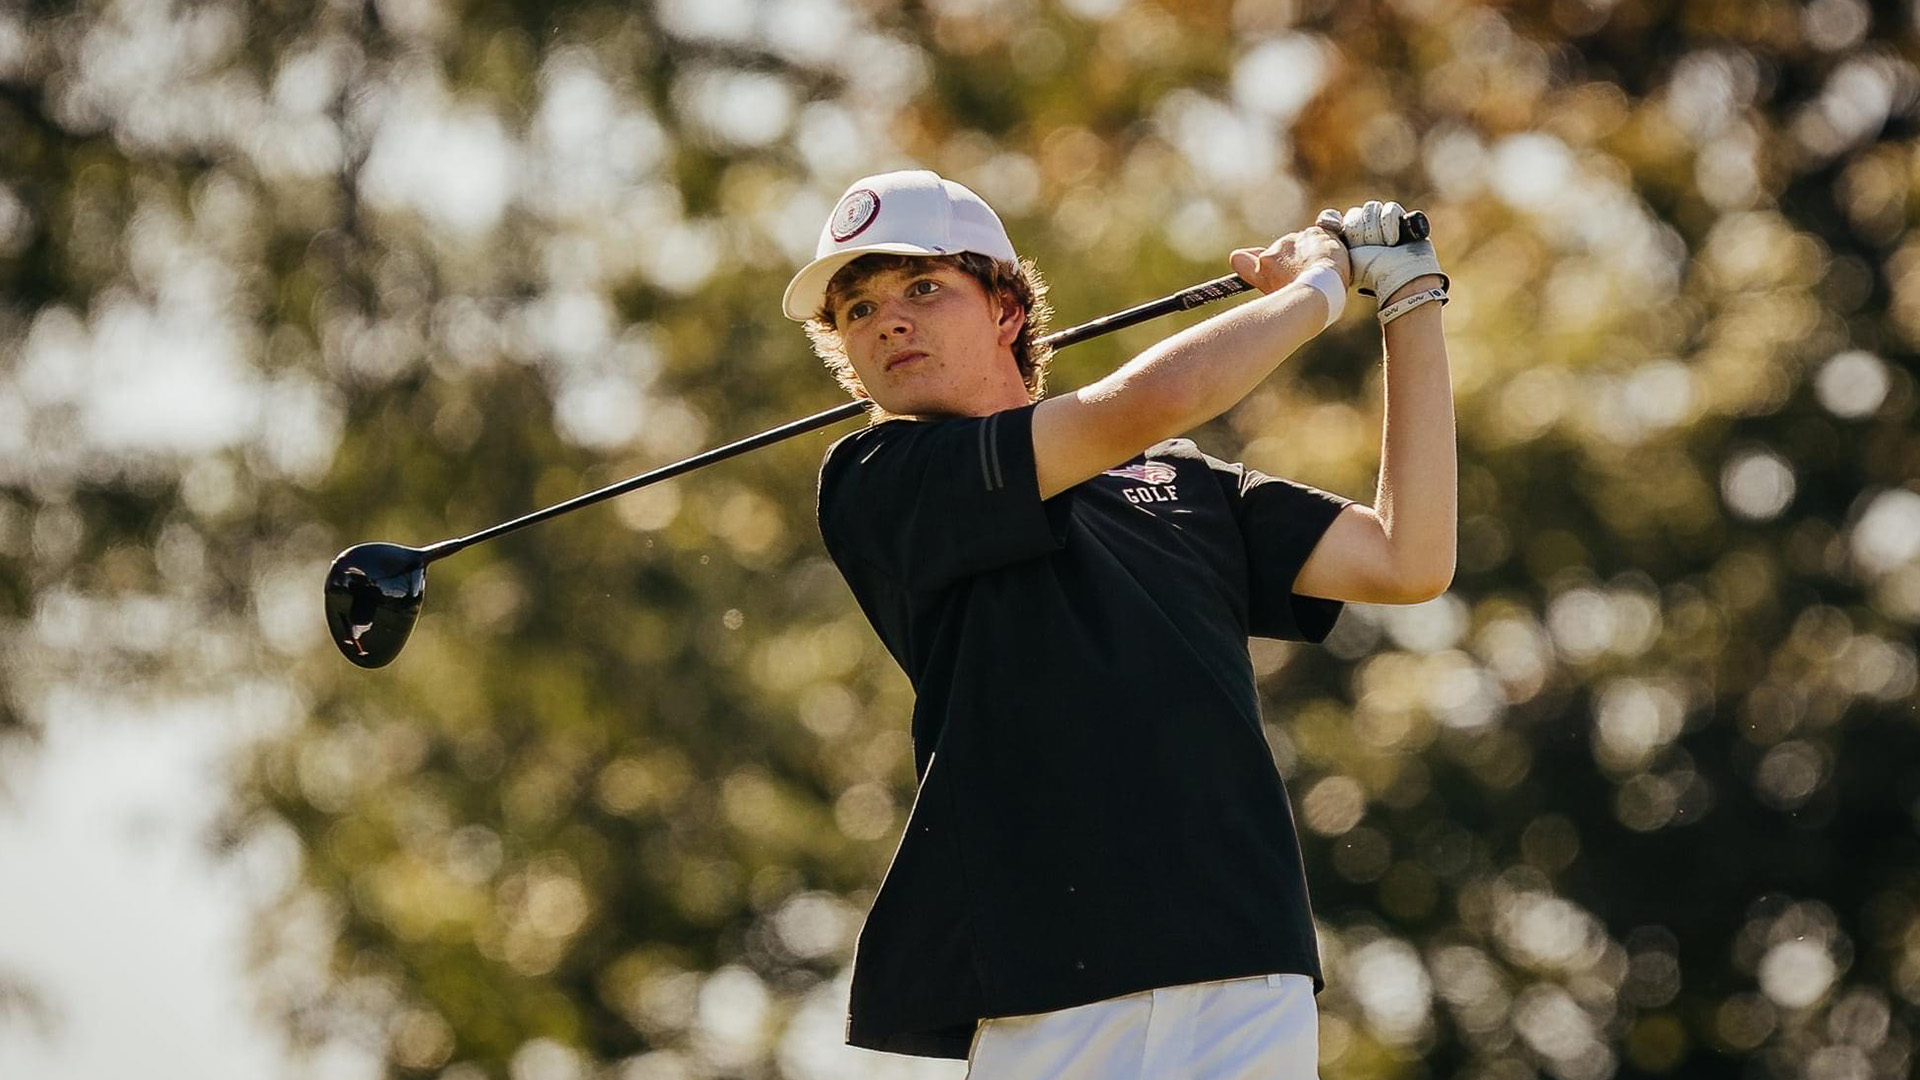 a young man swinging a golf club on a tee box